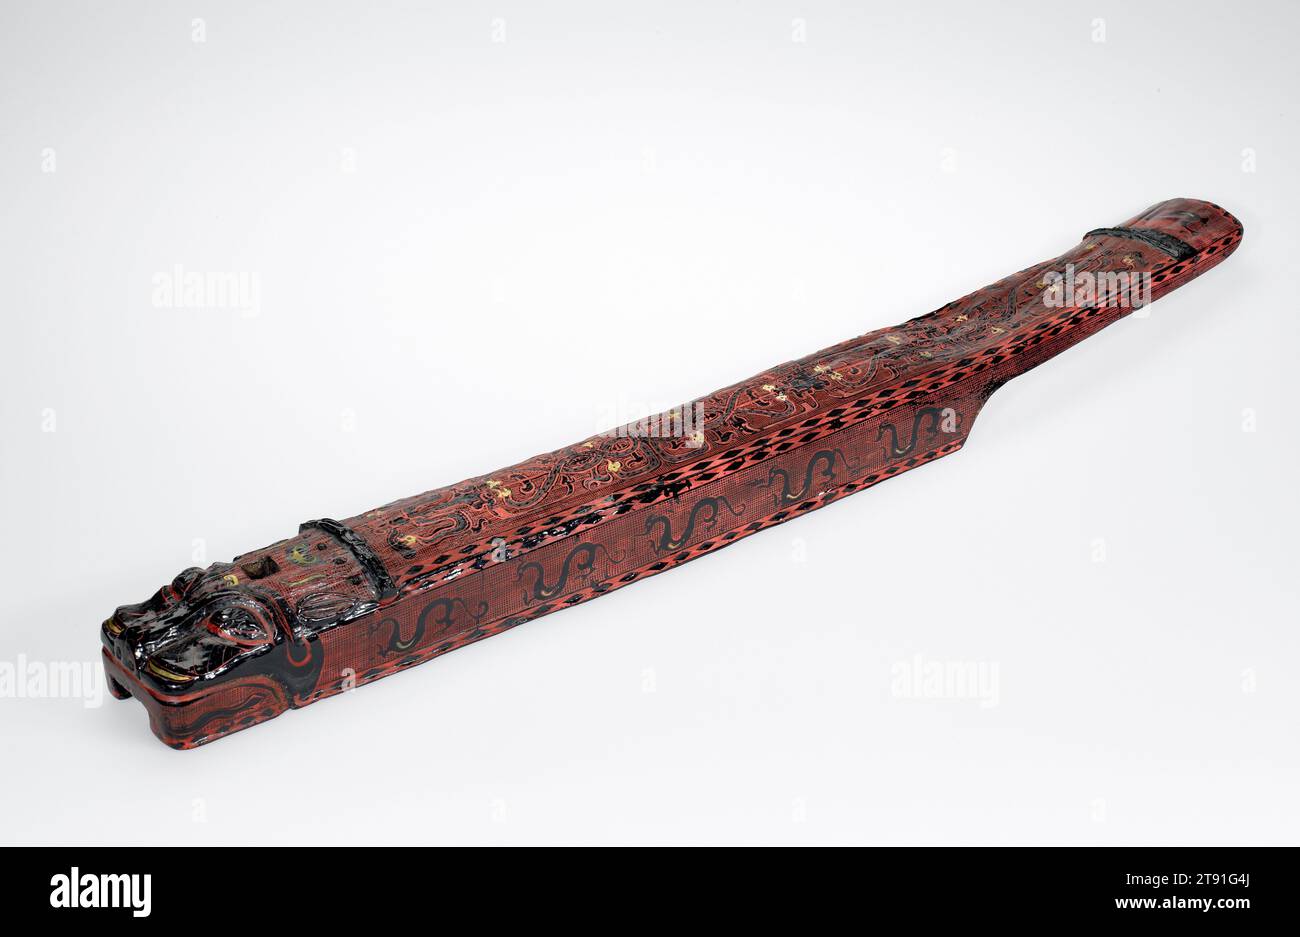 Zither (Qin), 5th century BCE, 2 3/4 x 3 5/16 x 34 1/4 in. (6.99 x 8.41 x 87 cm), Lacquer over wood core, China, 5th century BCE, Remarkable for its state of preservation and vivid colors, this rare five-stringed instrument called qin is constructed from a single piece of wood with a rectangular hole cut in the underside serving as a sound box. The important discovery of the tomb of Marquis I of Cheng (433 BCE), which yielded the massive set of sixty-five bronze bells also included two types of lacquer zithers: one version with ten strings resembled the rectangular type held by the tomb Stock Photo